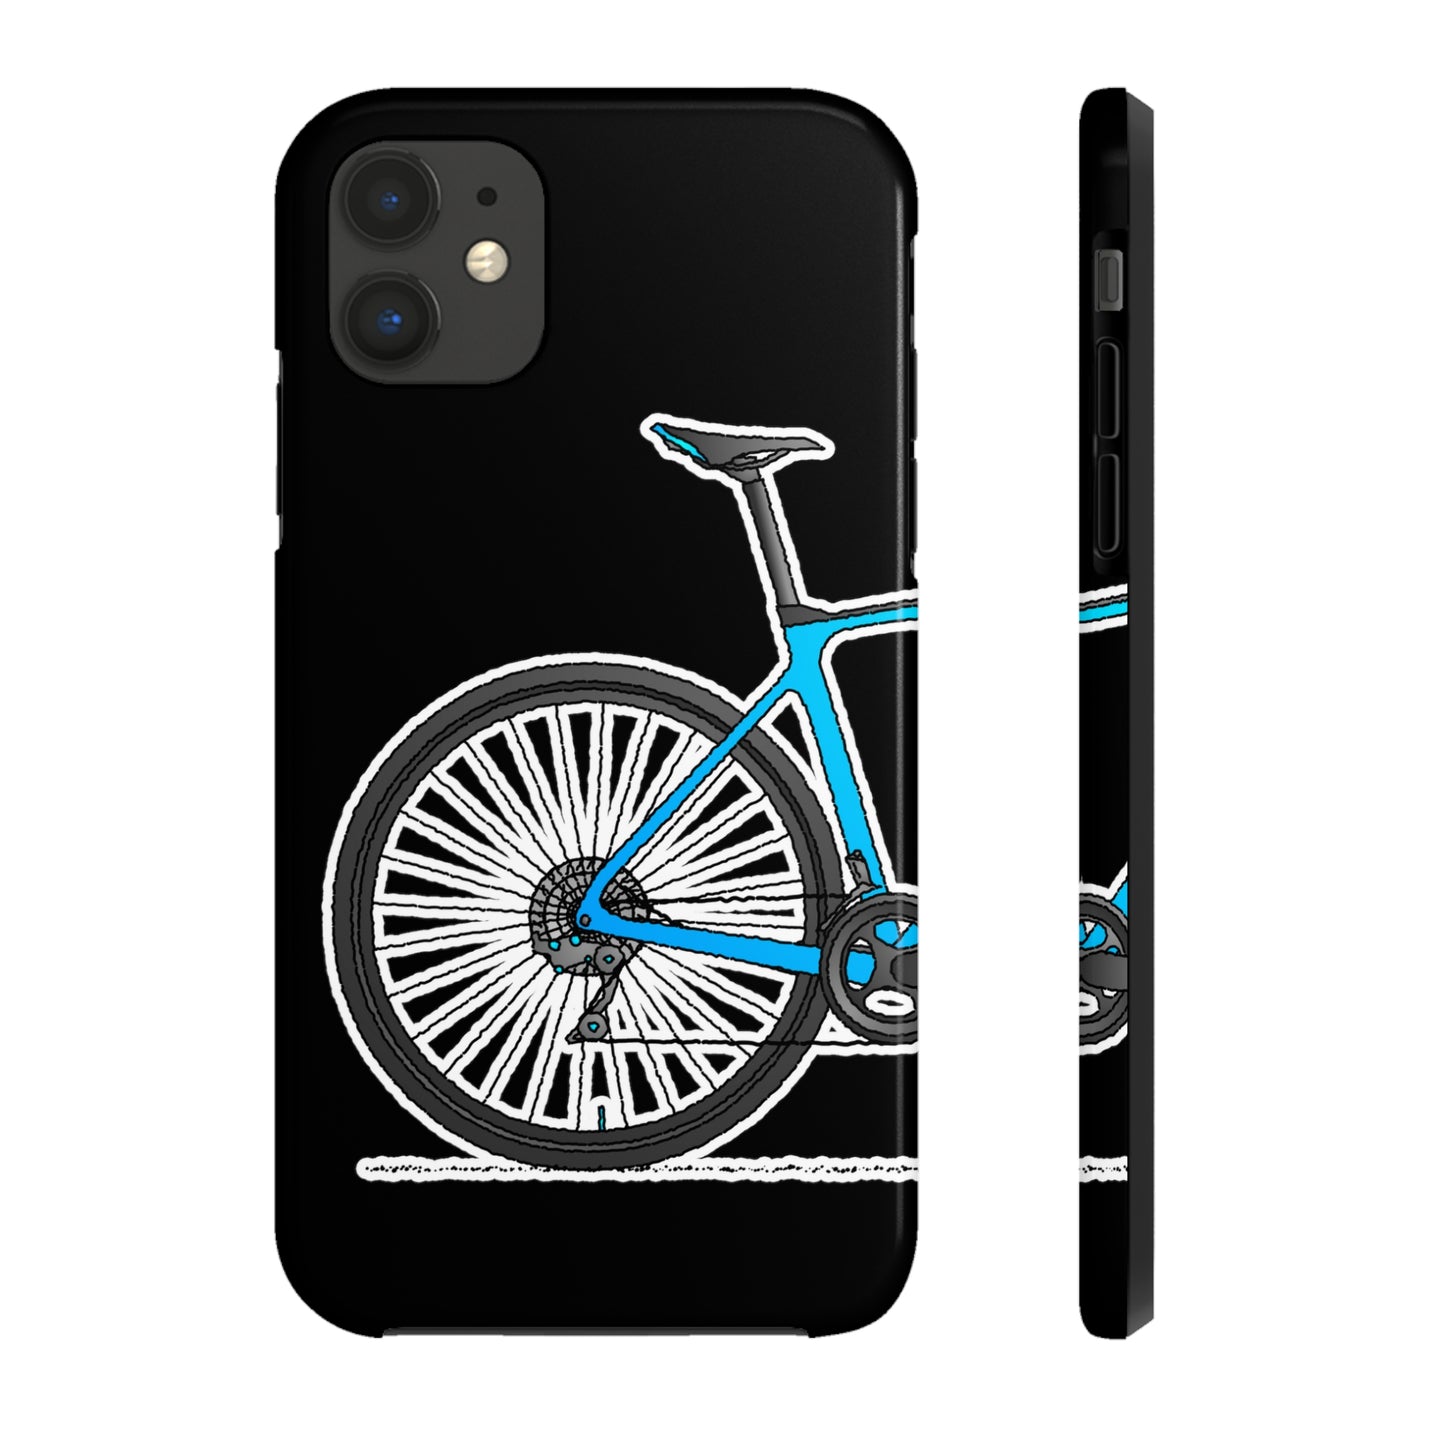 Blue Bicycle Tough iPhone Case. Road Gravel. 7,8,X,11,12,13,14. i001